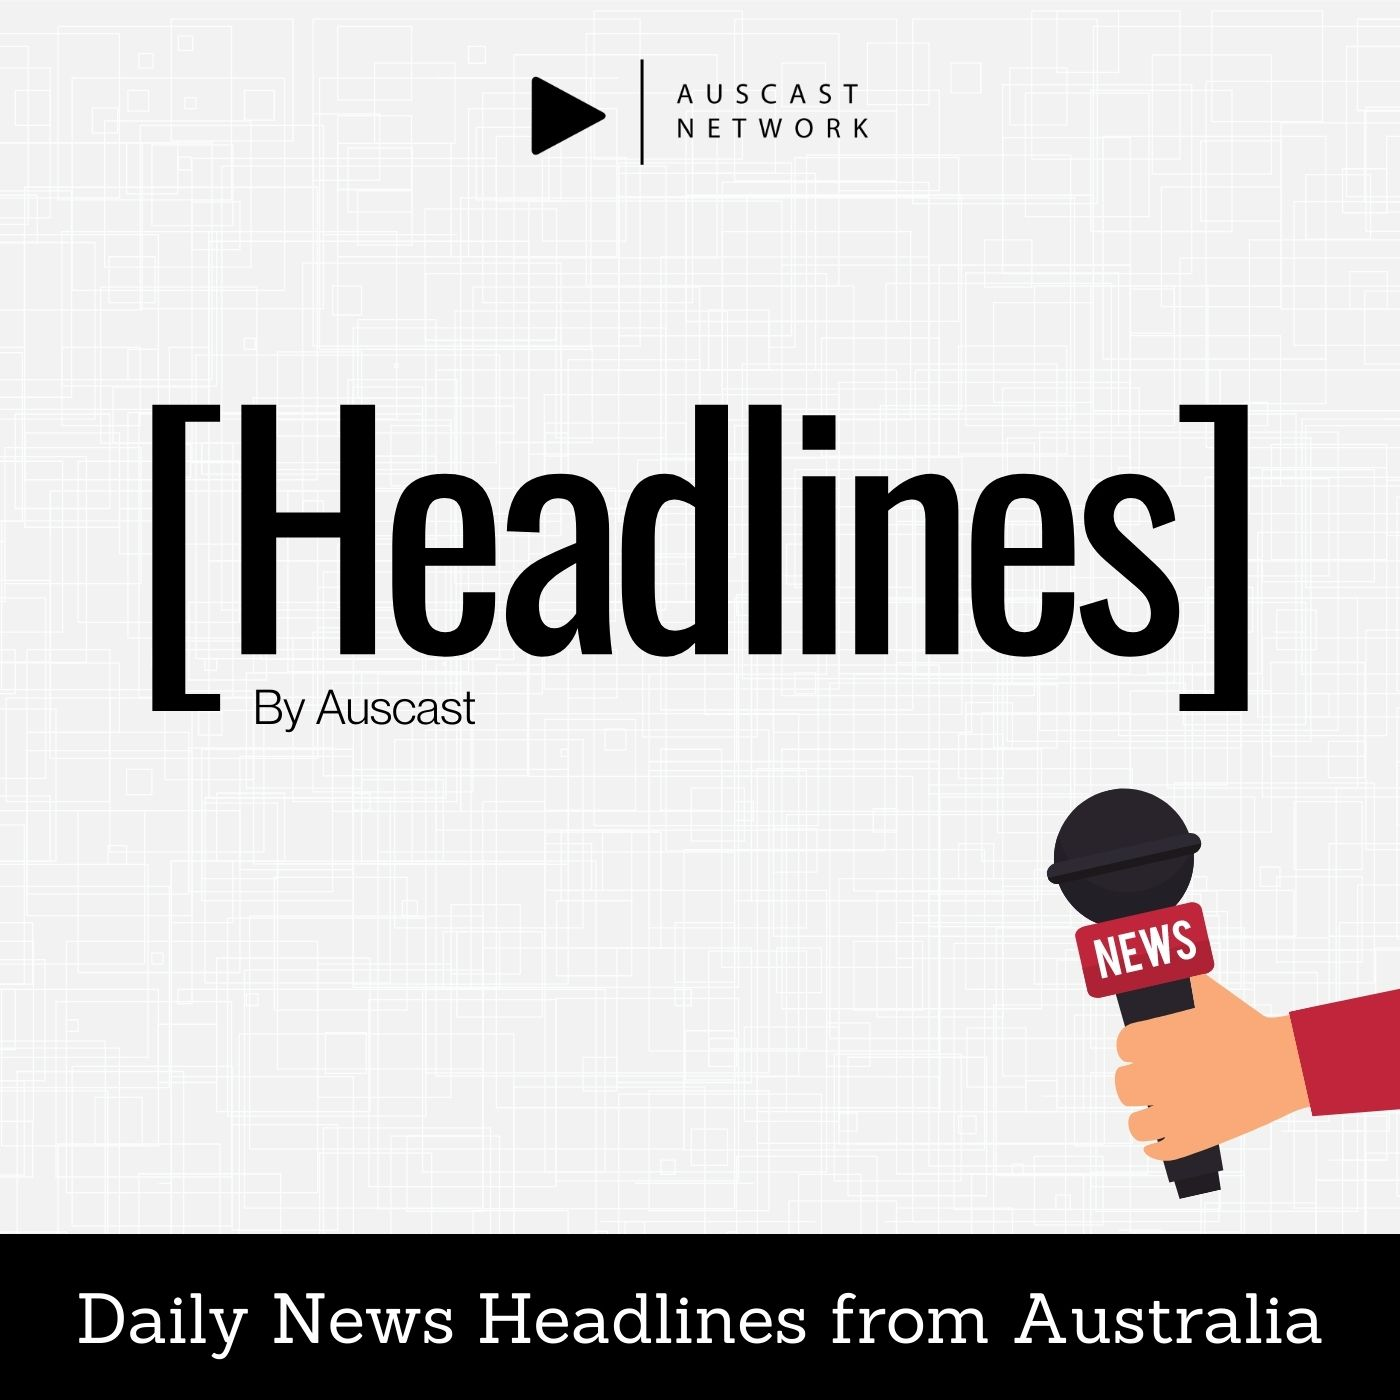 AUSTRALIA to help PNG, Prince Phillip update, MDMA could help and more - Headlines by Auscast - Wednesday March 17, 2021